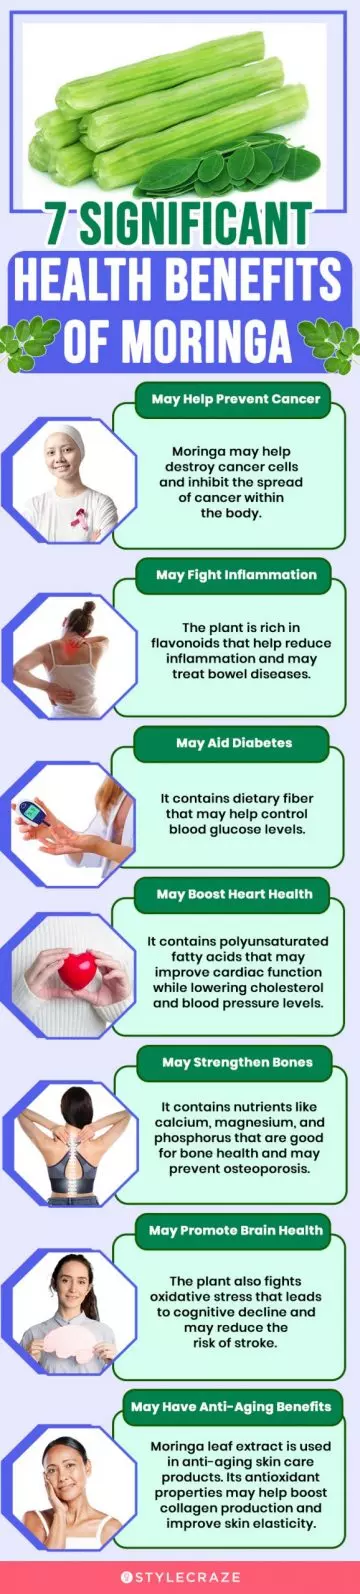 7 significant health benefits of moringa (infographic)